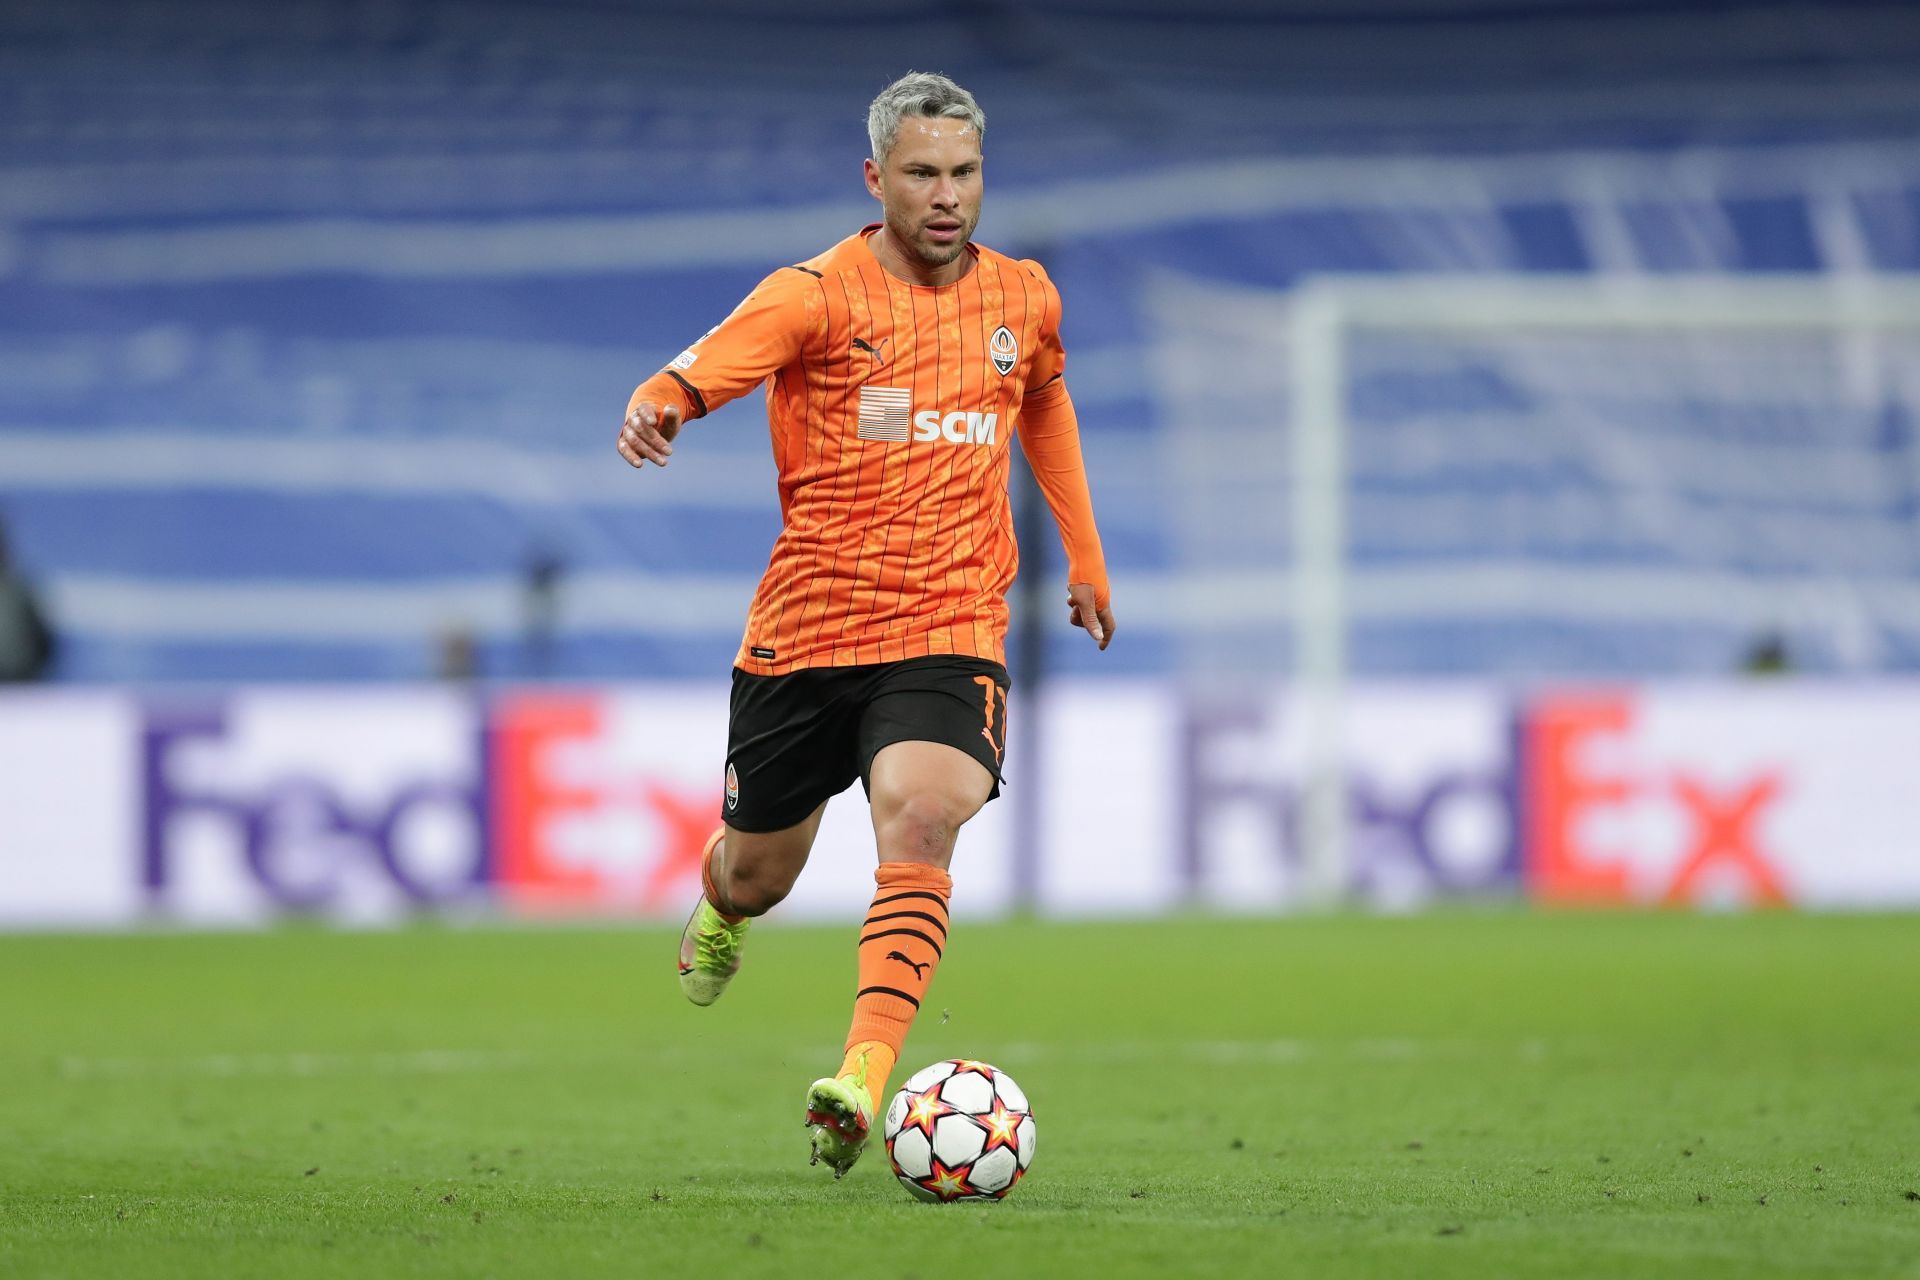 Shakhtar Donetsk face Sheriff in their final UEFA Champions League group stage fixture on Tuesday